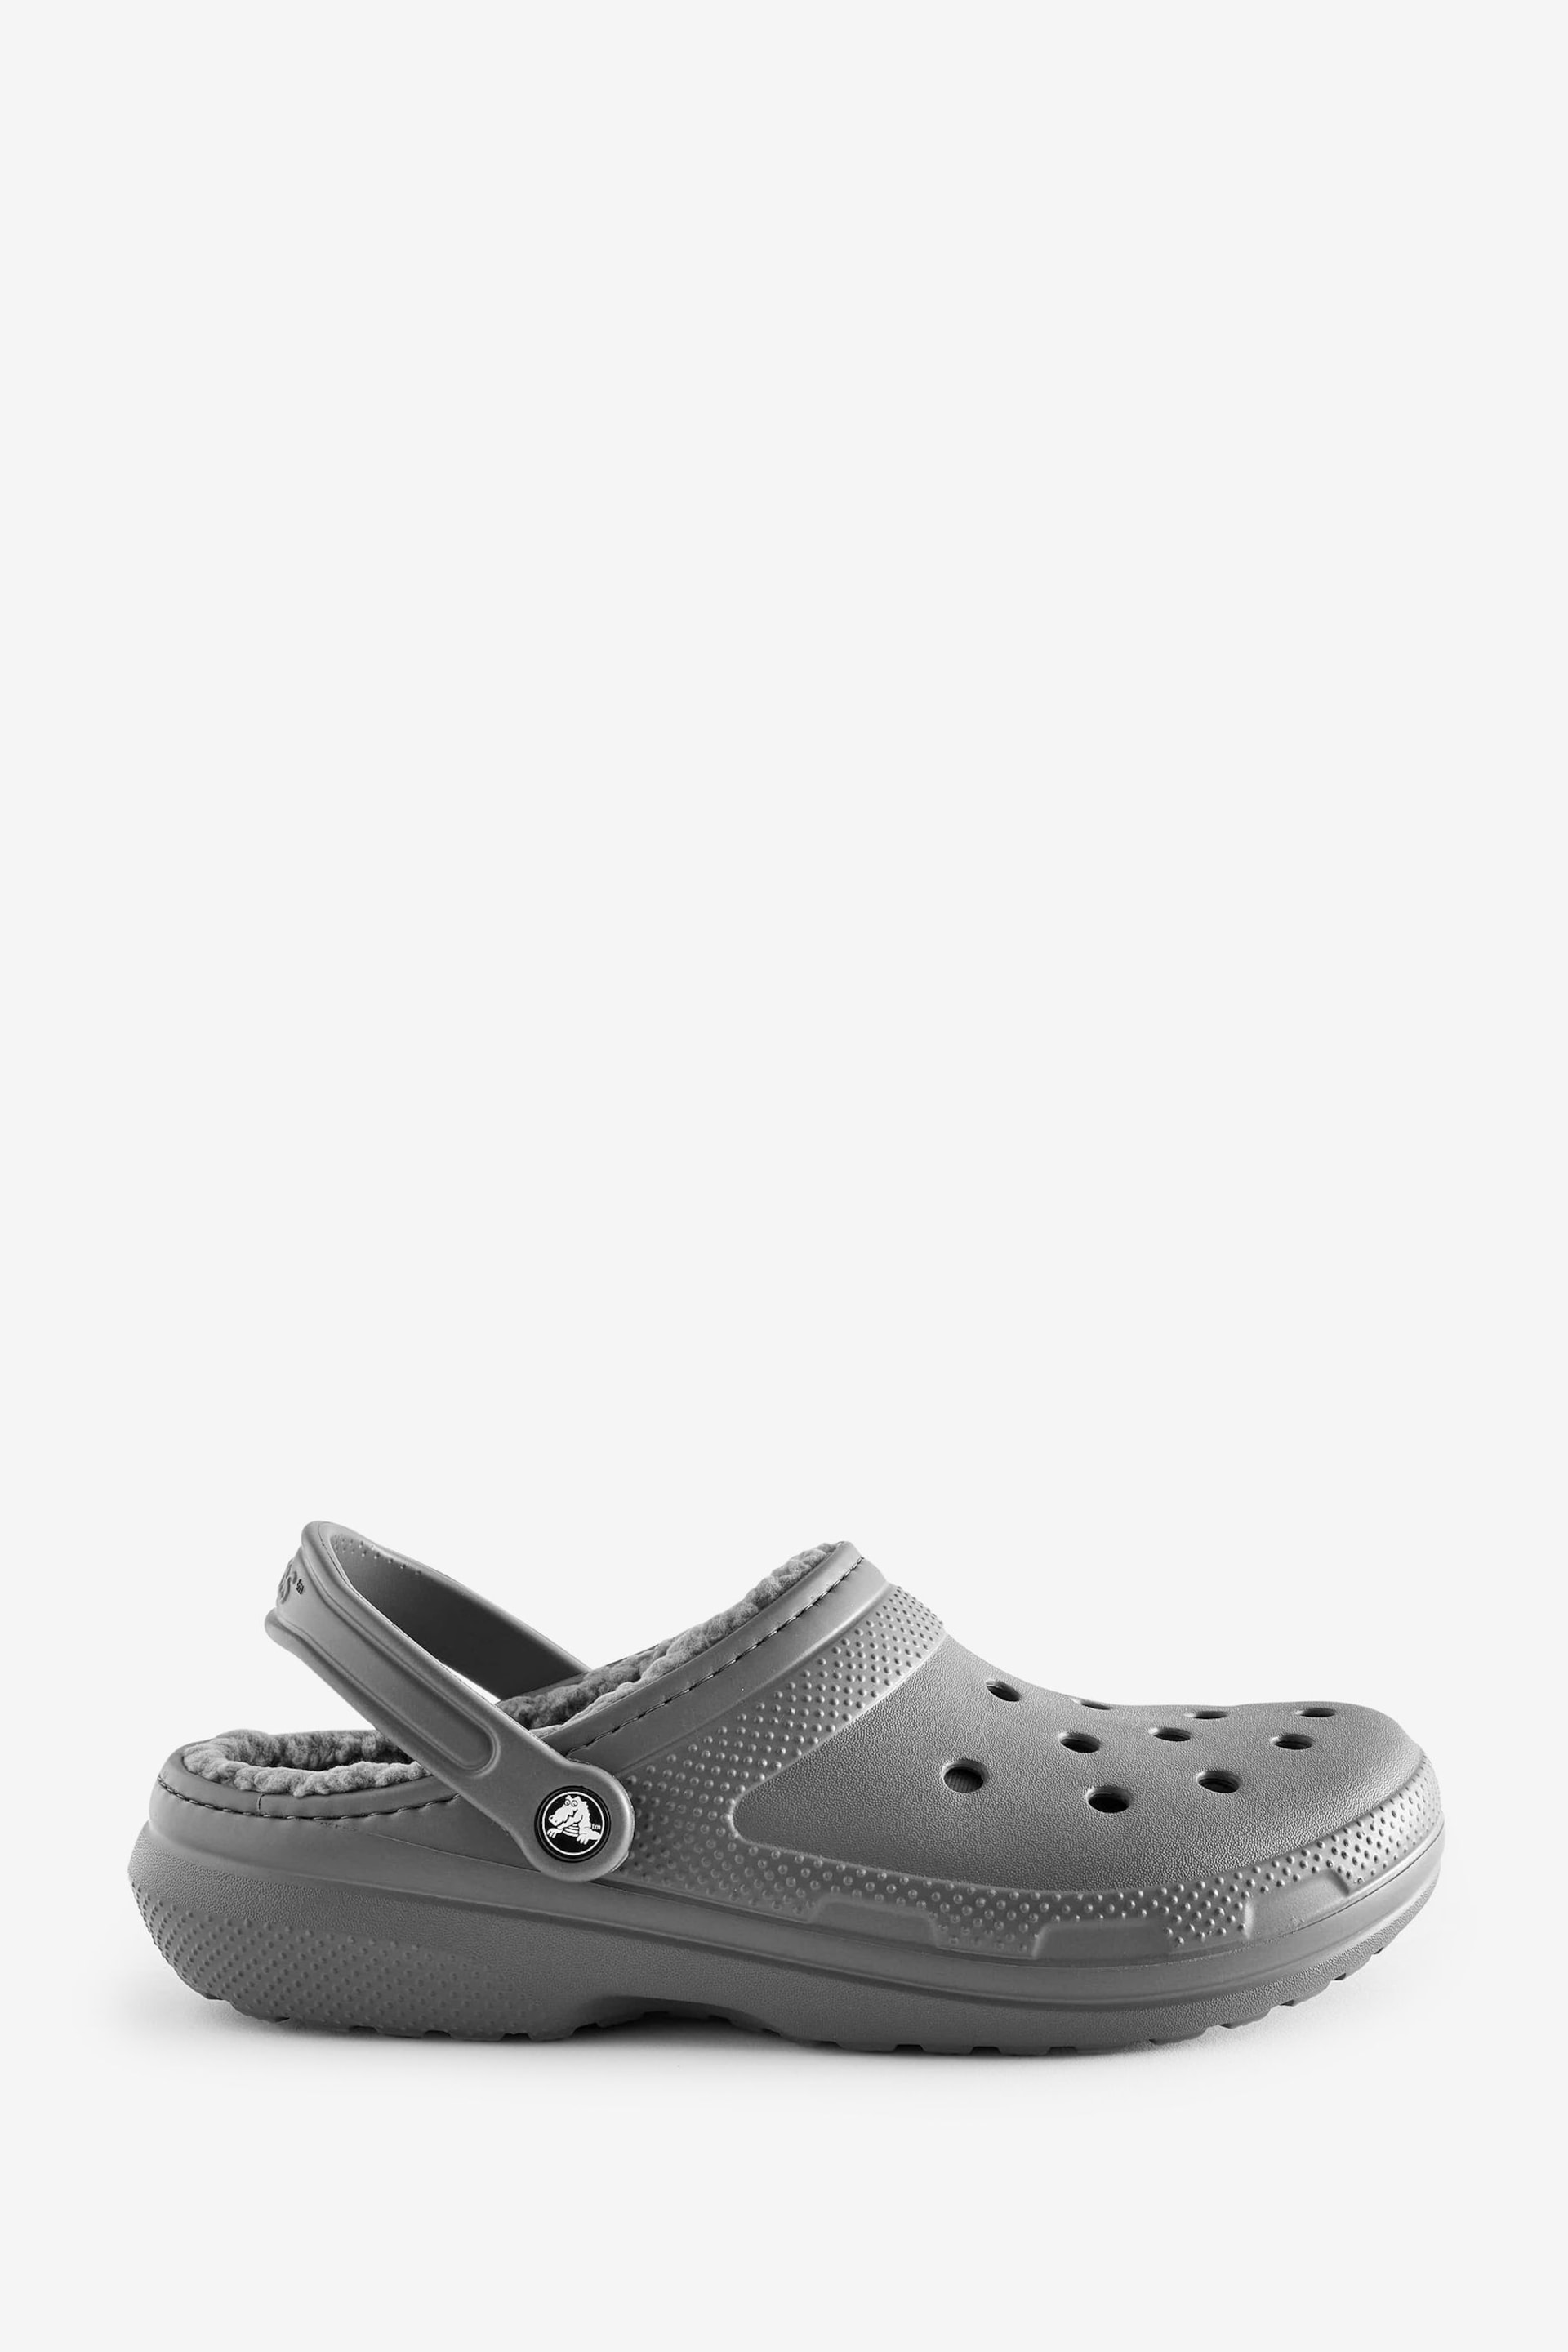 Crocs Fluffy Lined Classic Clogs - Image 1 of 6